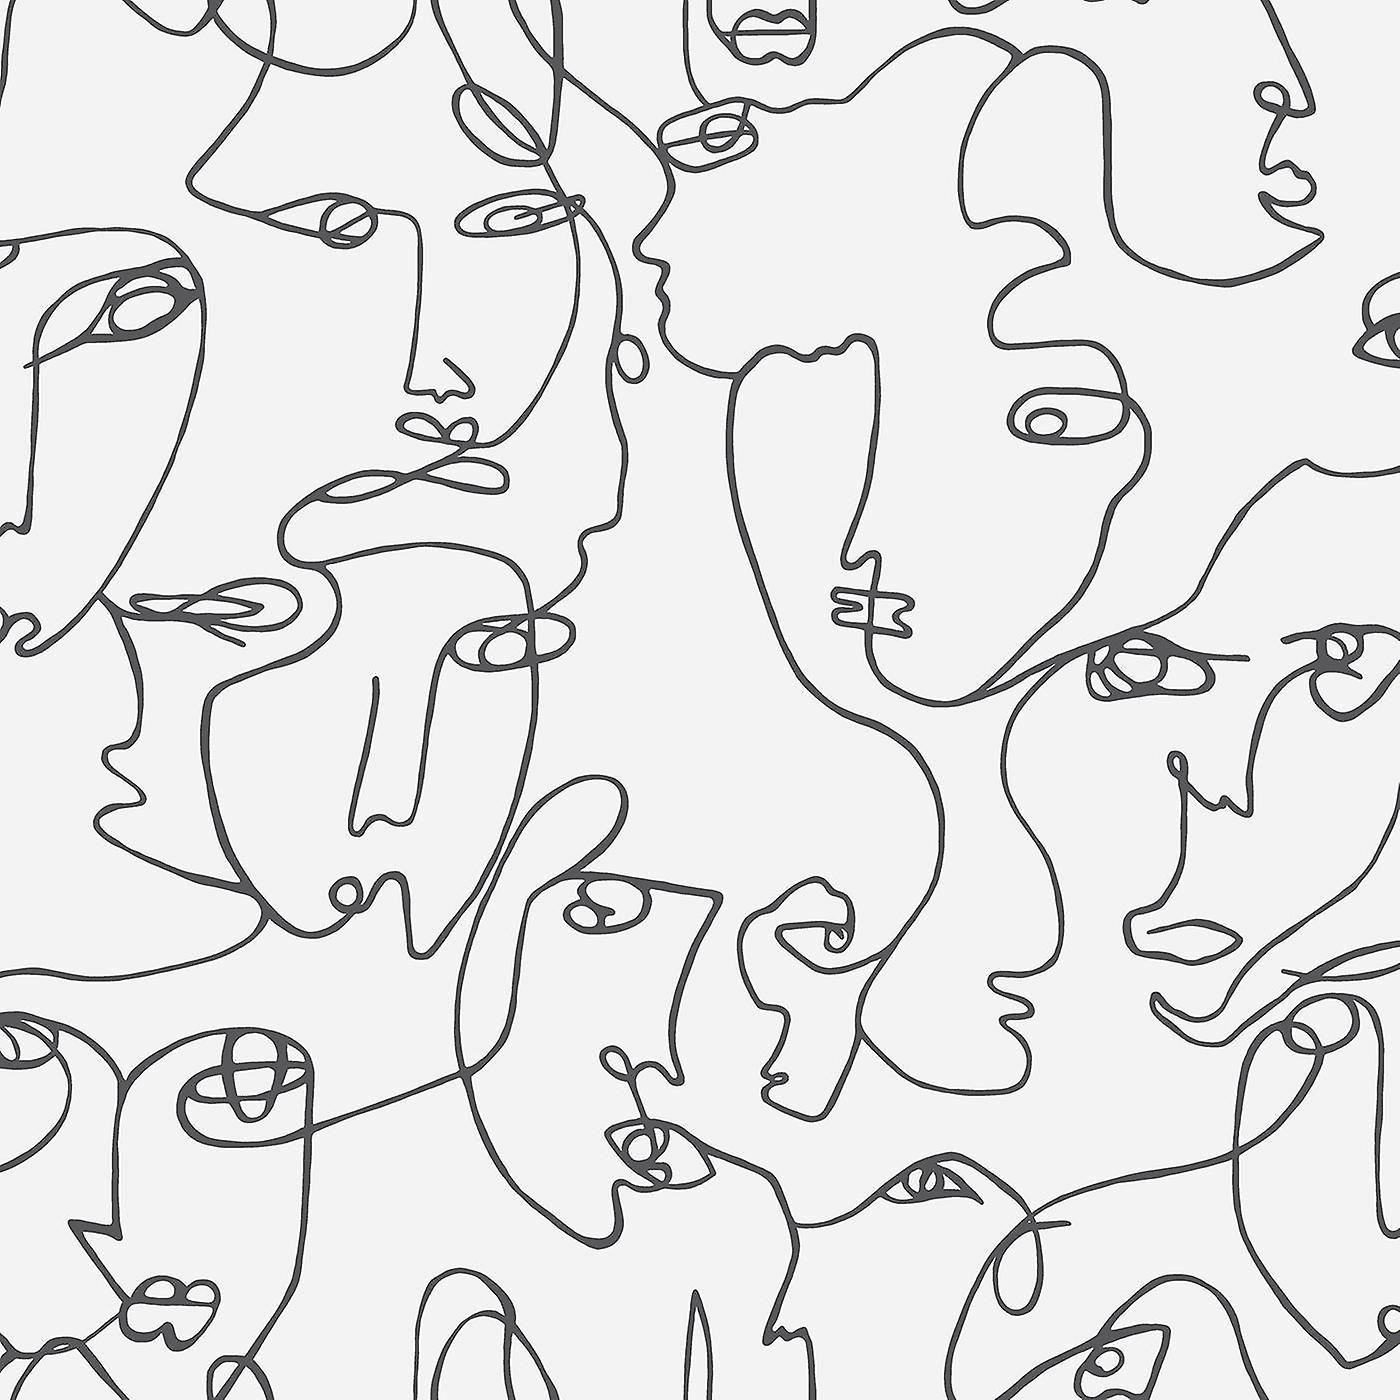 Abstract face drawing wallpaper 1400x1400